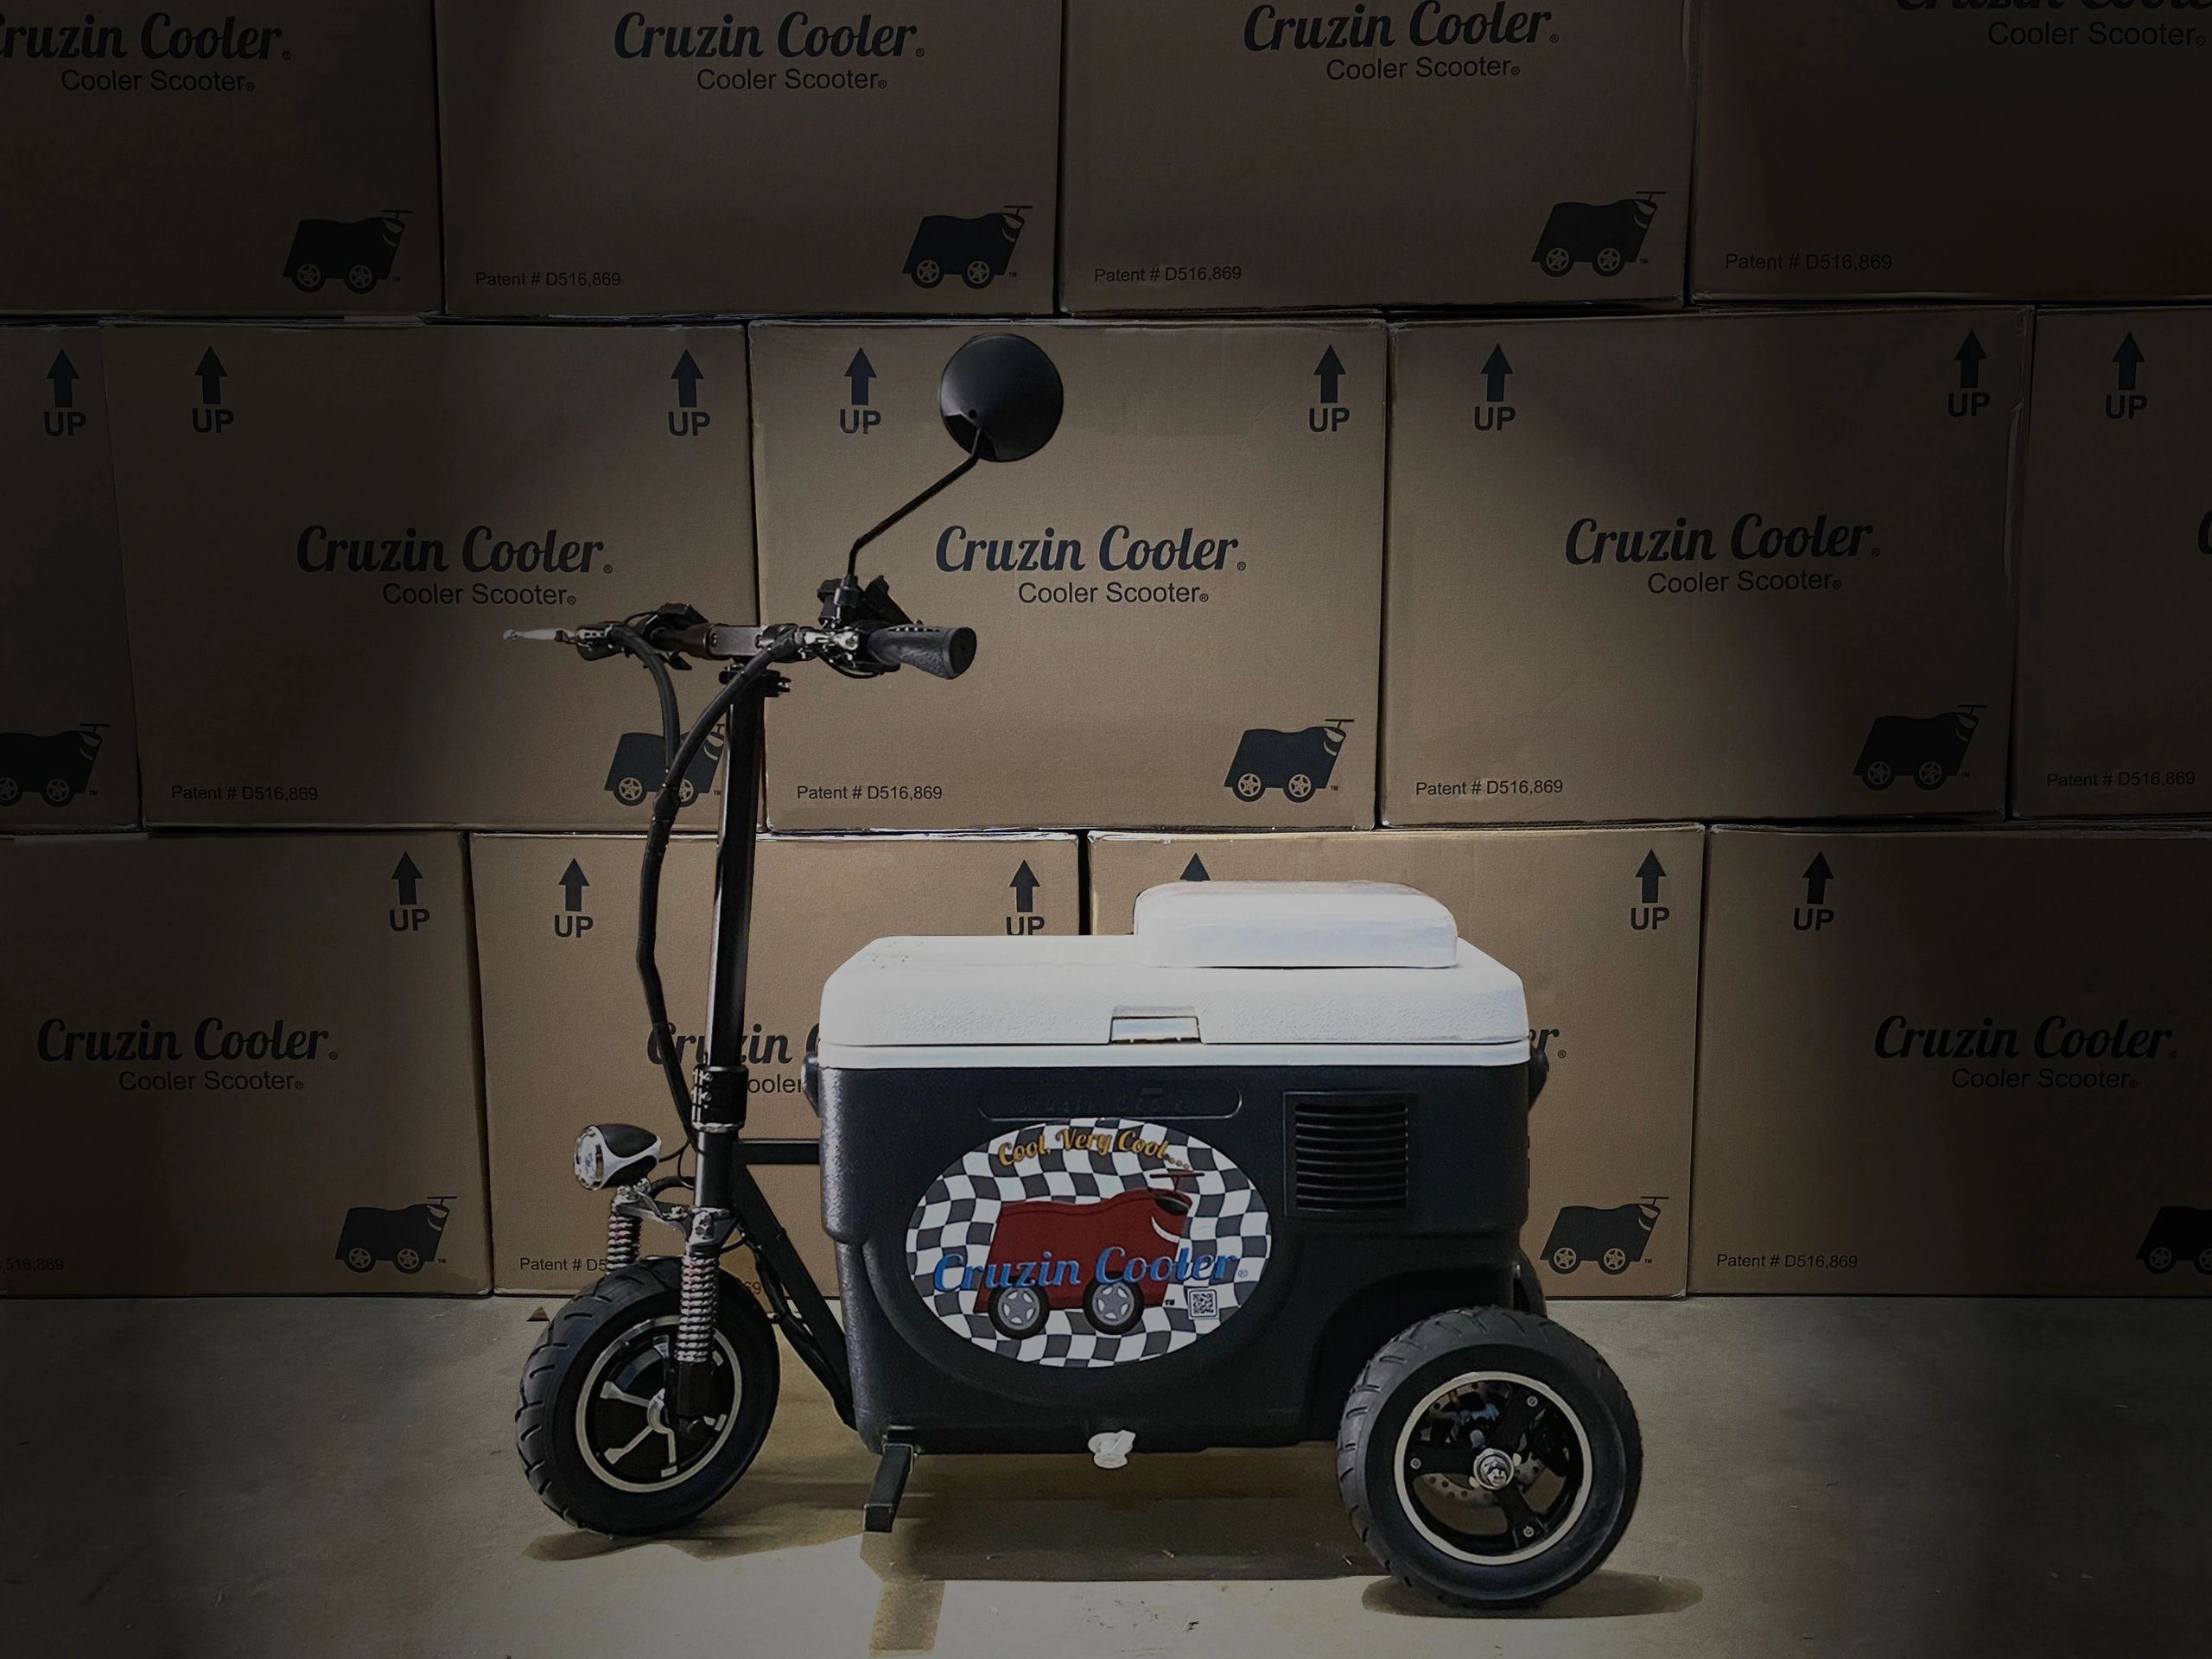 A cooler scooter model